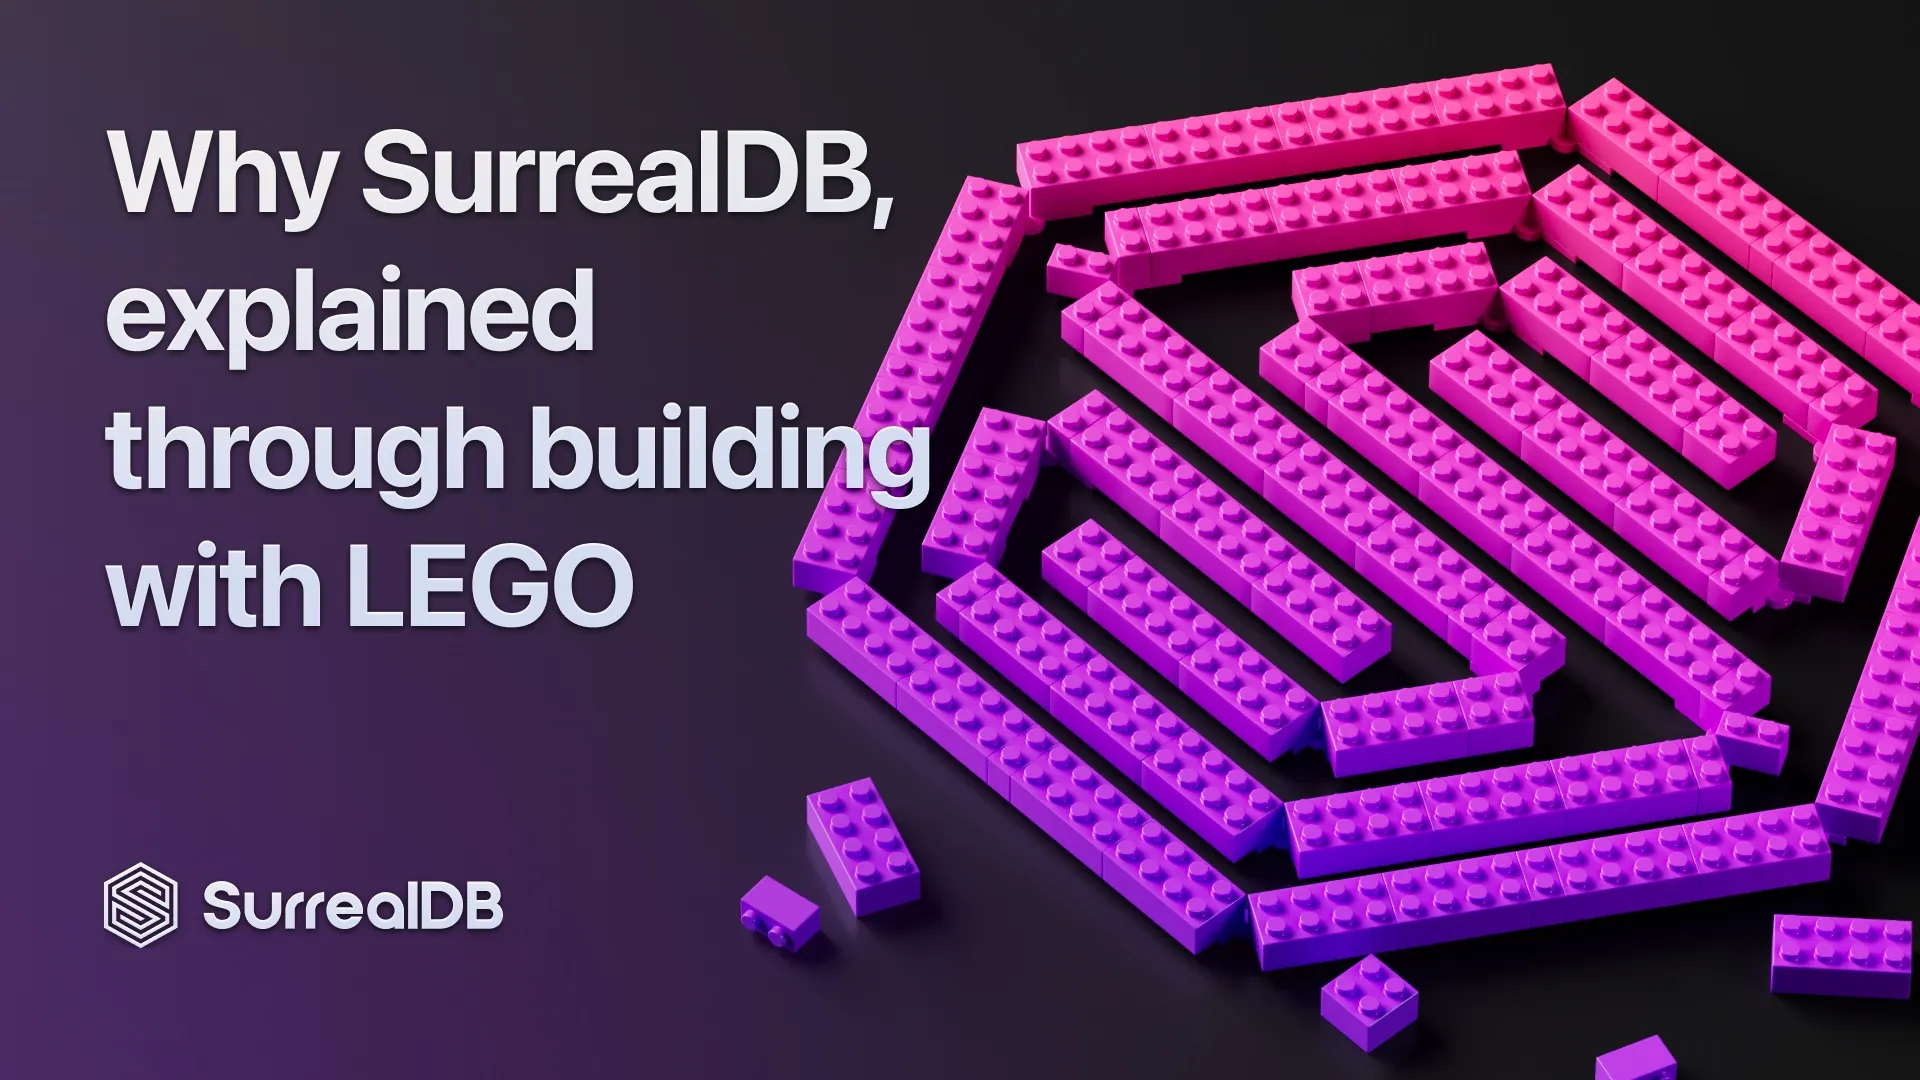 ELI5 - Why SurrealDB, explained through building with LEGO